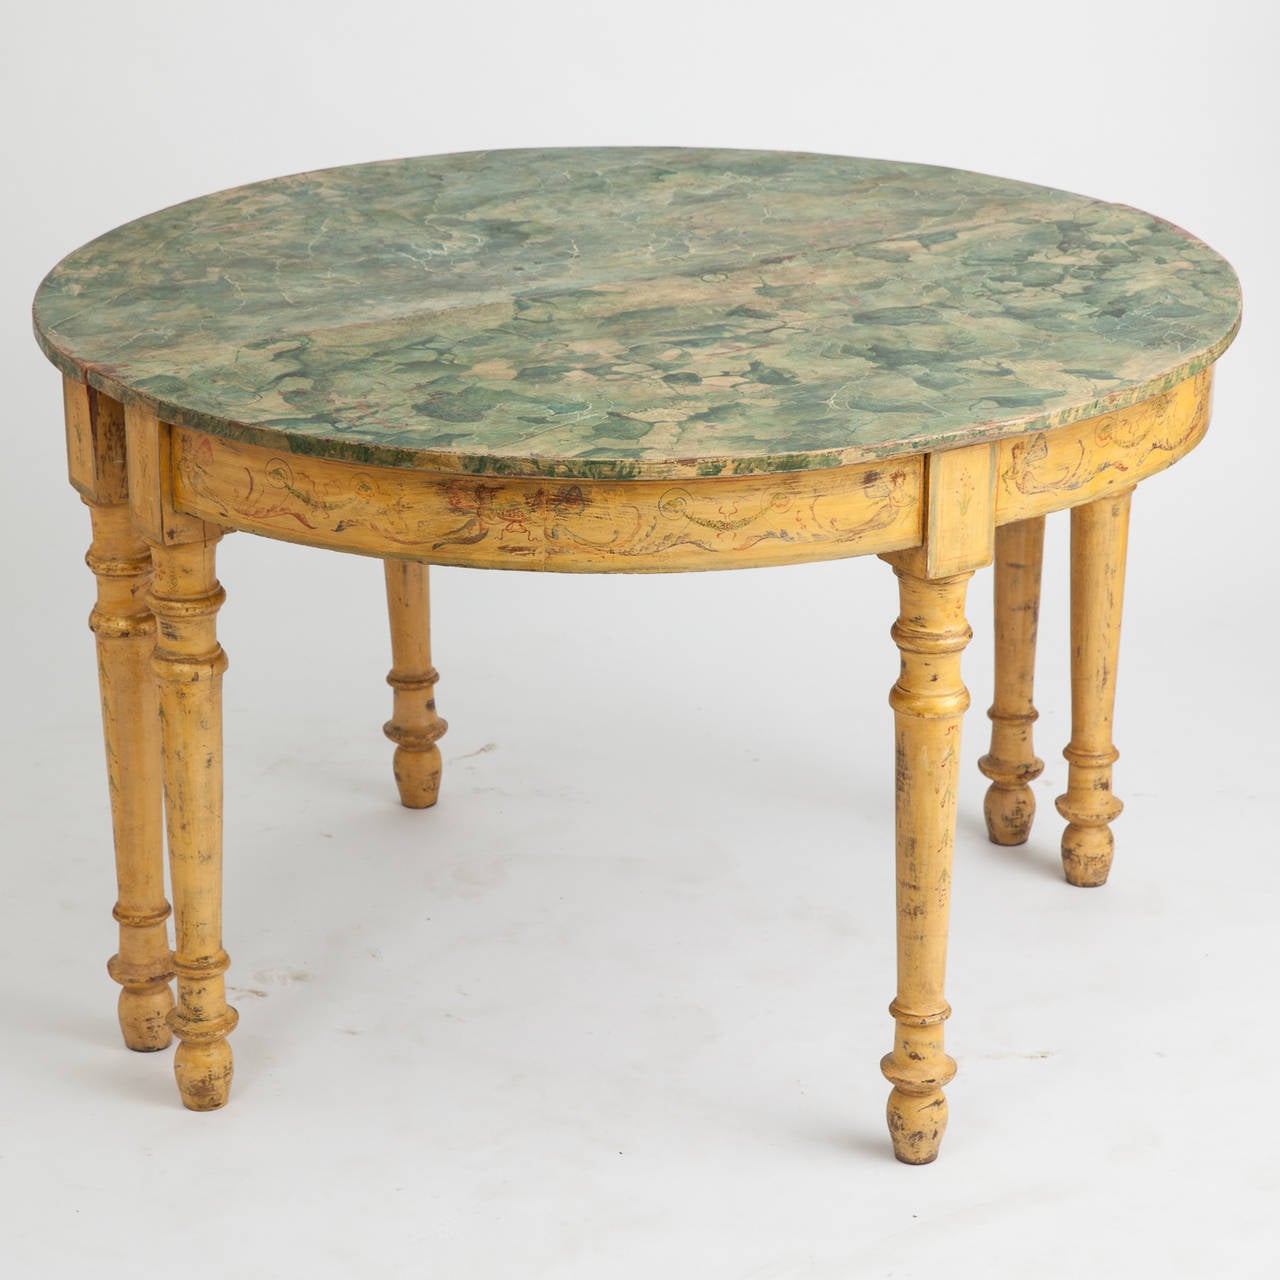 A pair of outstanding Italian demilune tables with an original painted base in a sunny yellow with a green faux marble top. The base has traces of the original painted drawings of whimsical mermaids with long feathery tails interspersed with a